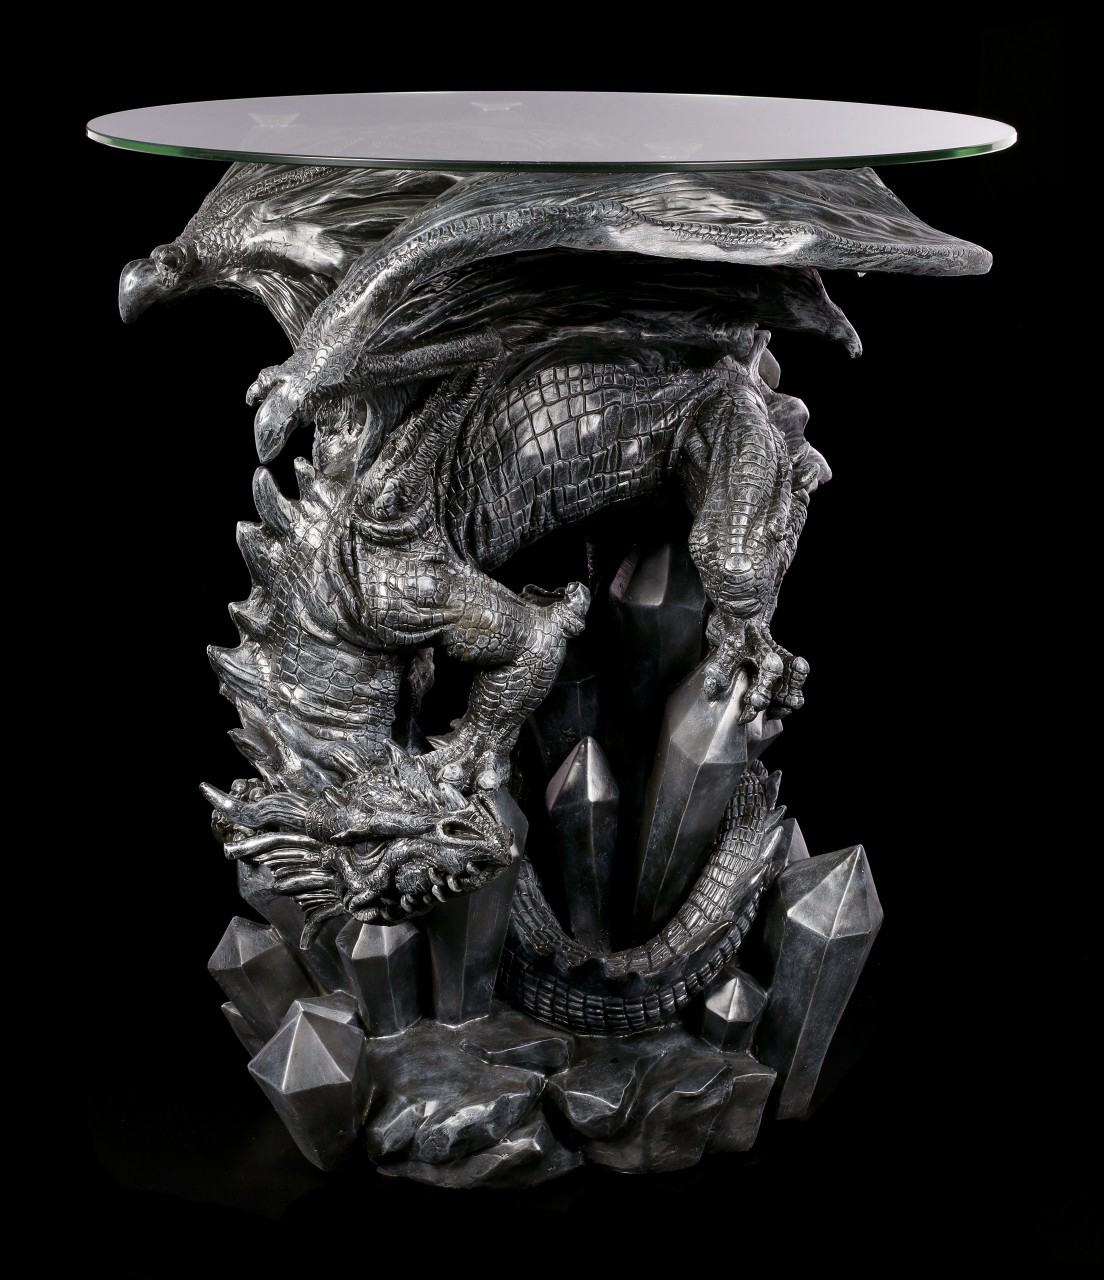 Dragon Table with Glass Plate - Dark Cave